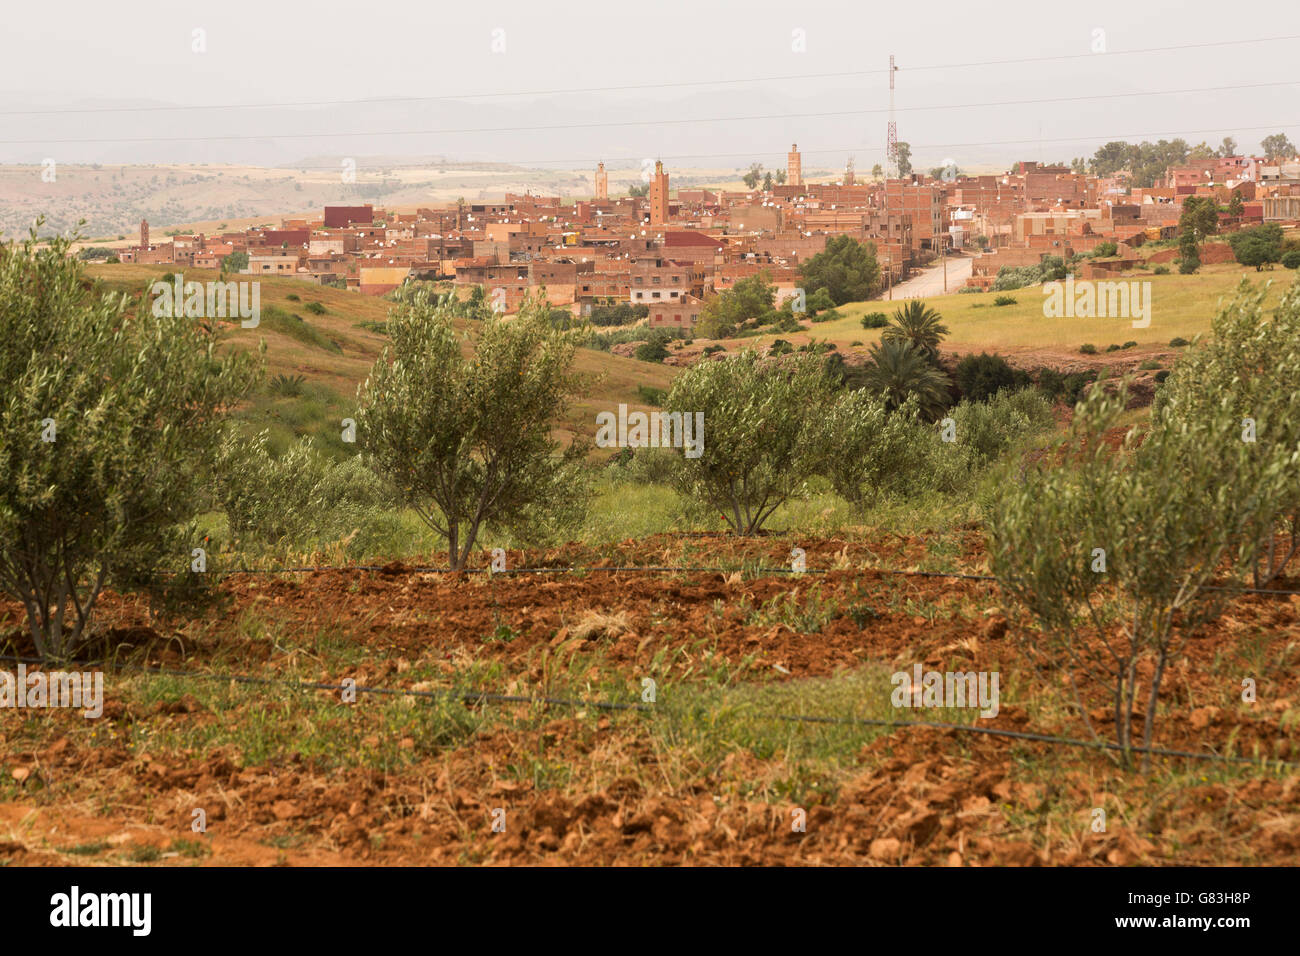 An irrigated olive tree grove stands outside the town of S'Hak, in central Morocco. Stock Photo